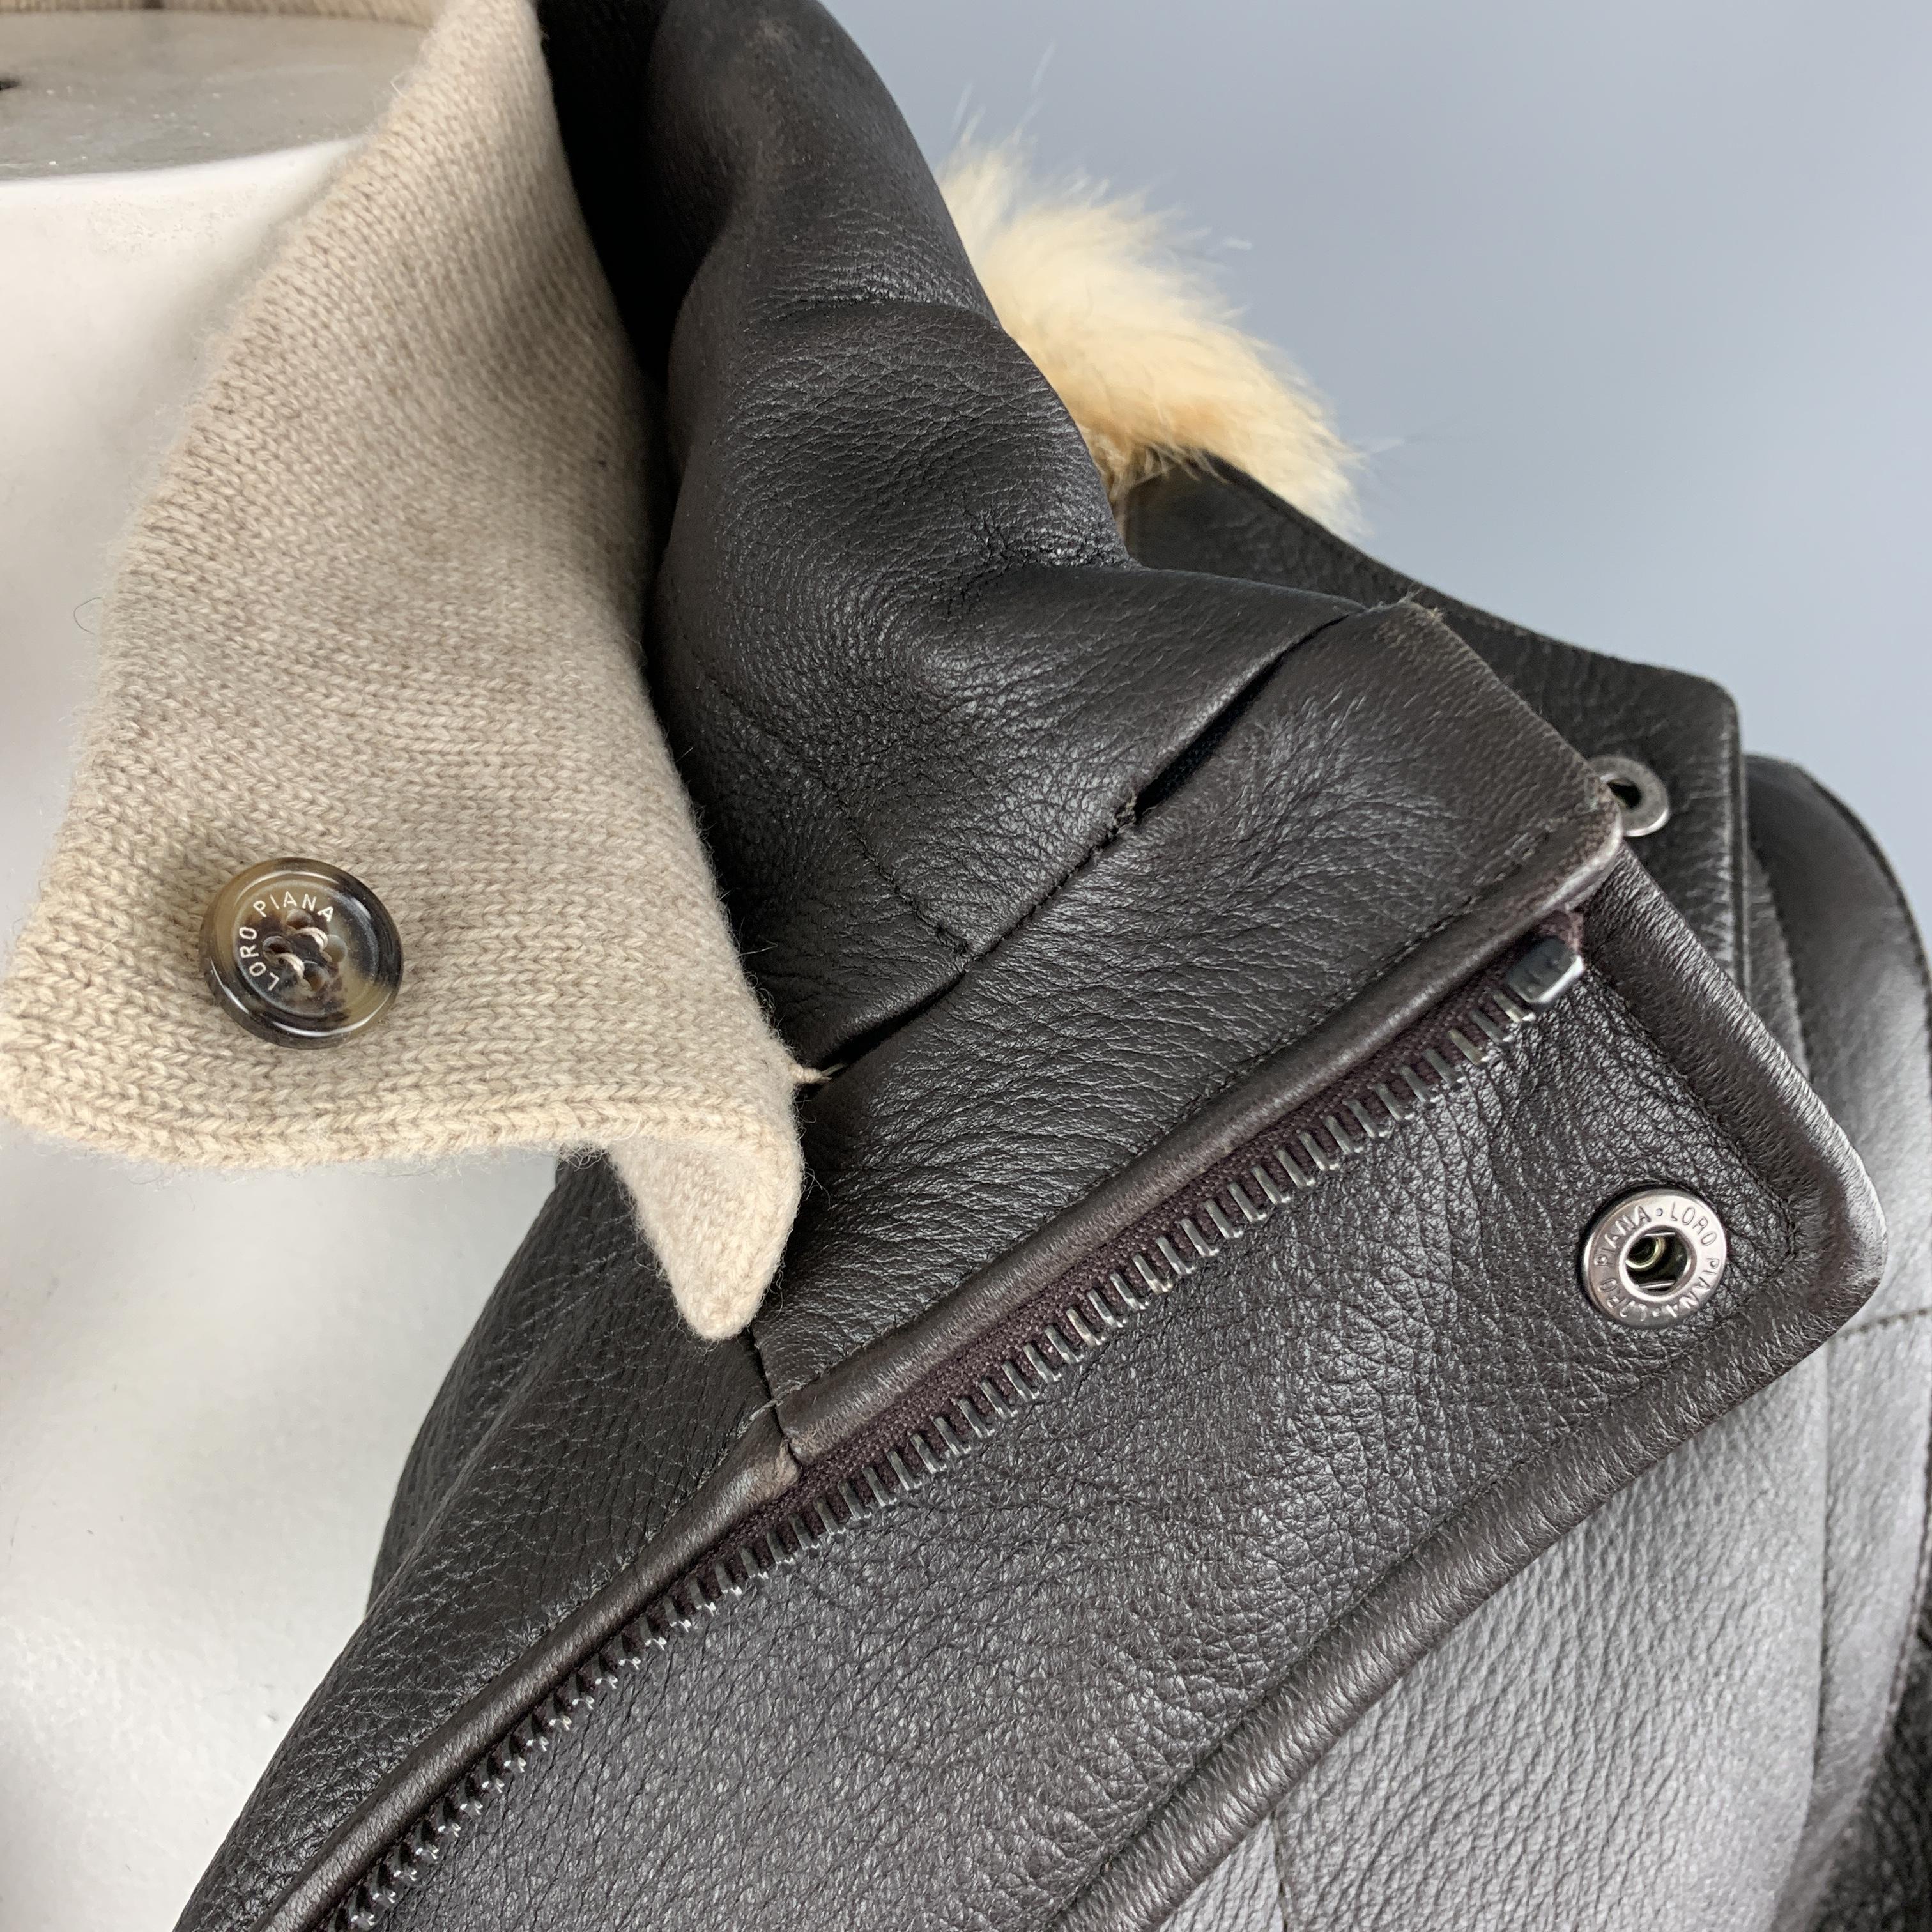 LORO PIANA parka jacket comes in brown quilted textured leather with a high neck with detachable cashmere liner, double zip up front with snap placket, cashmere lining, detachable hood with soft fox fur trim, and zip off sleeves. Made in Italy.

New